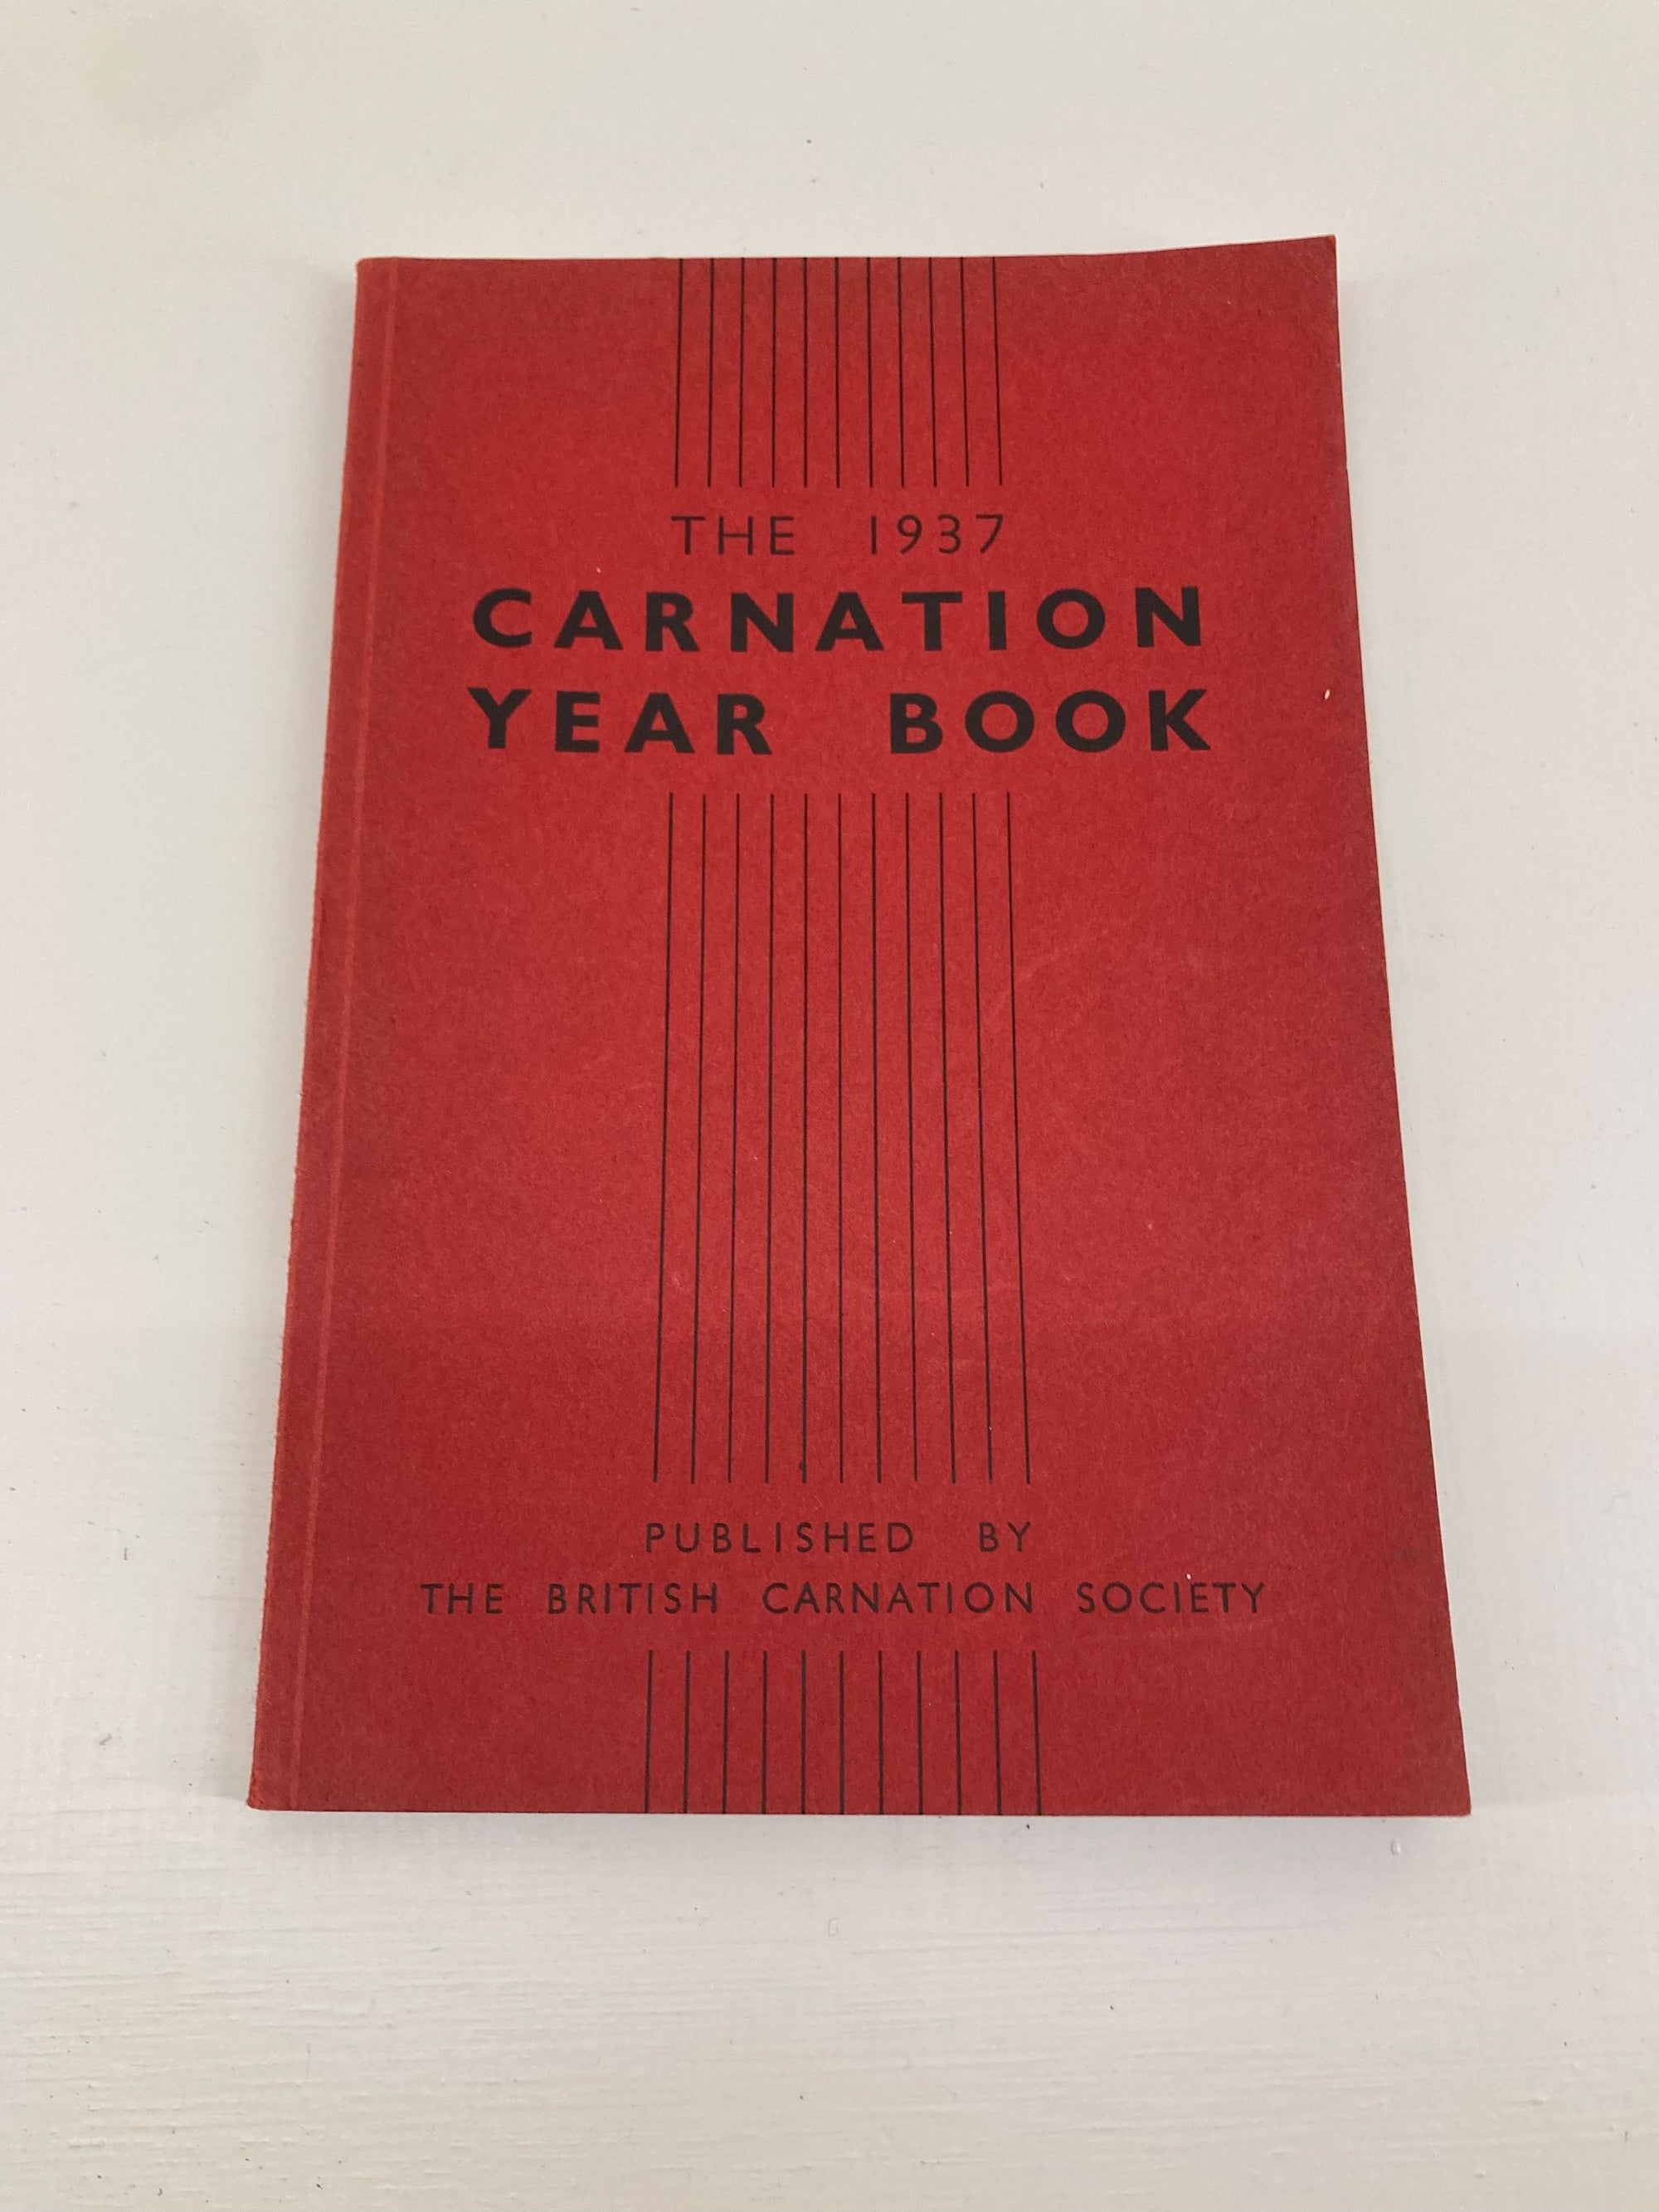 Carnation Year Book for 1937